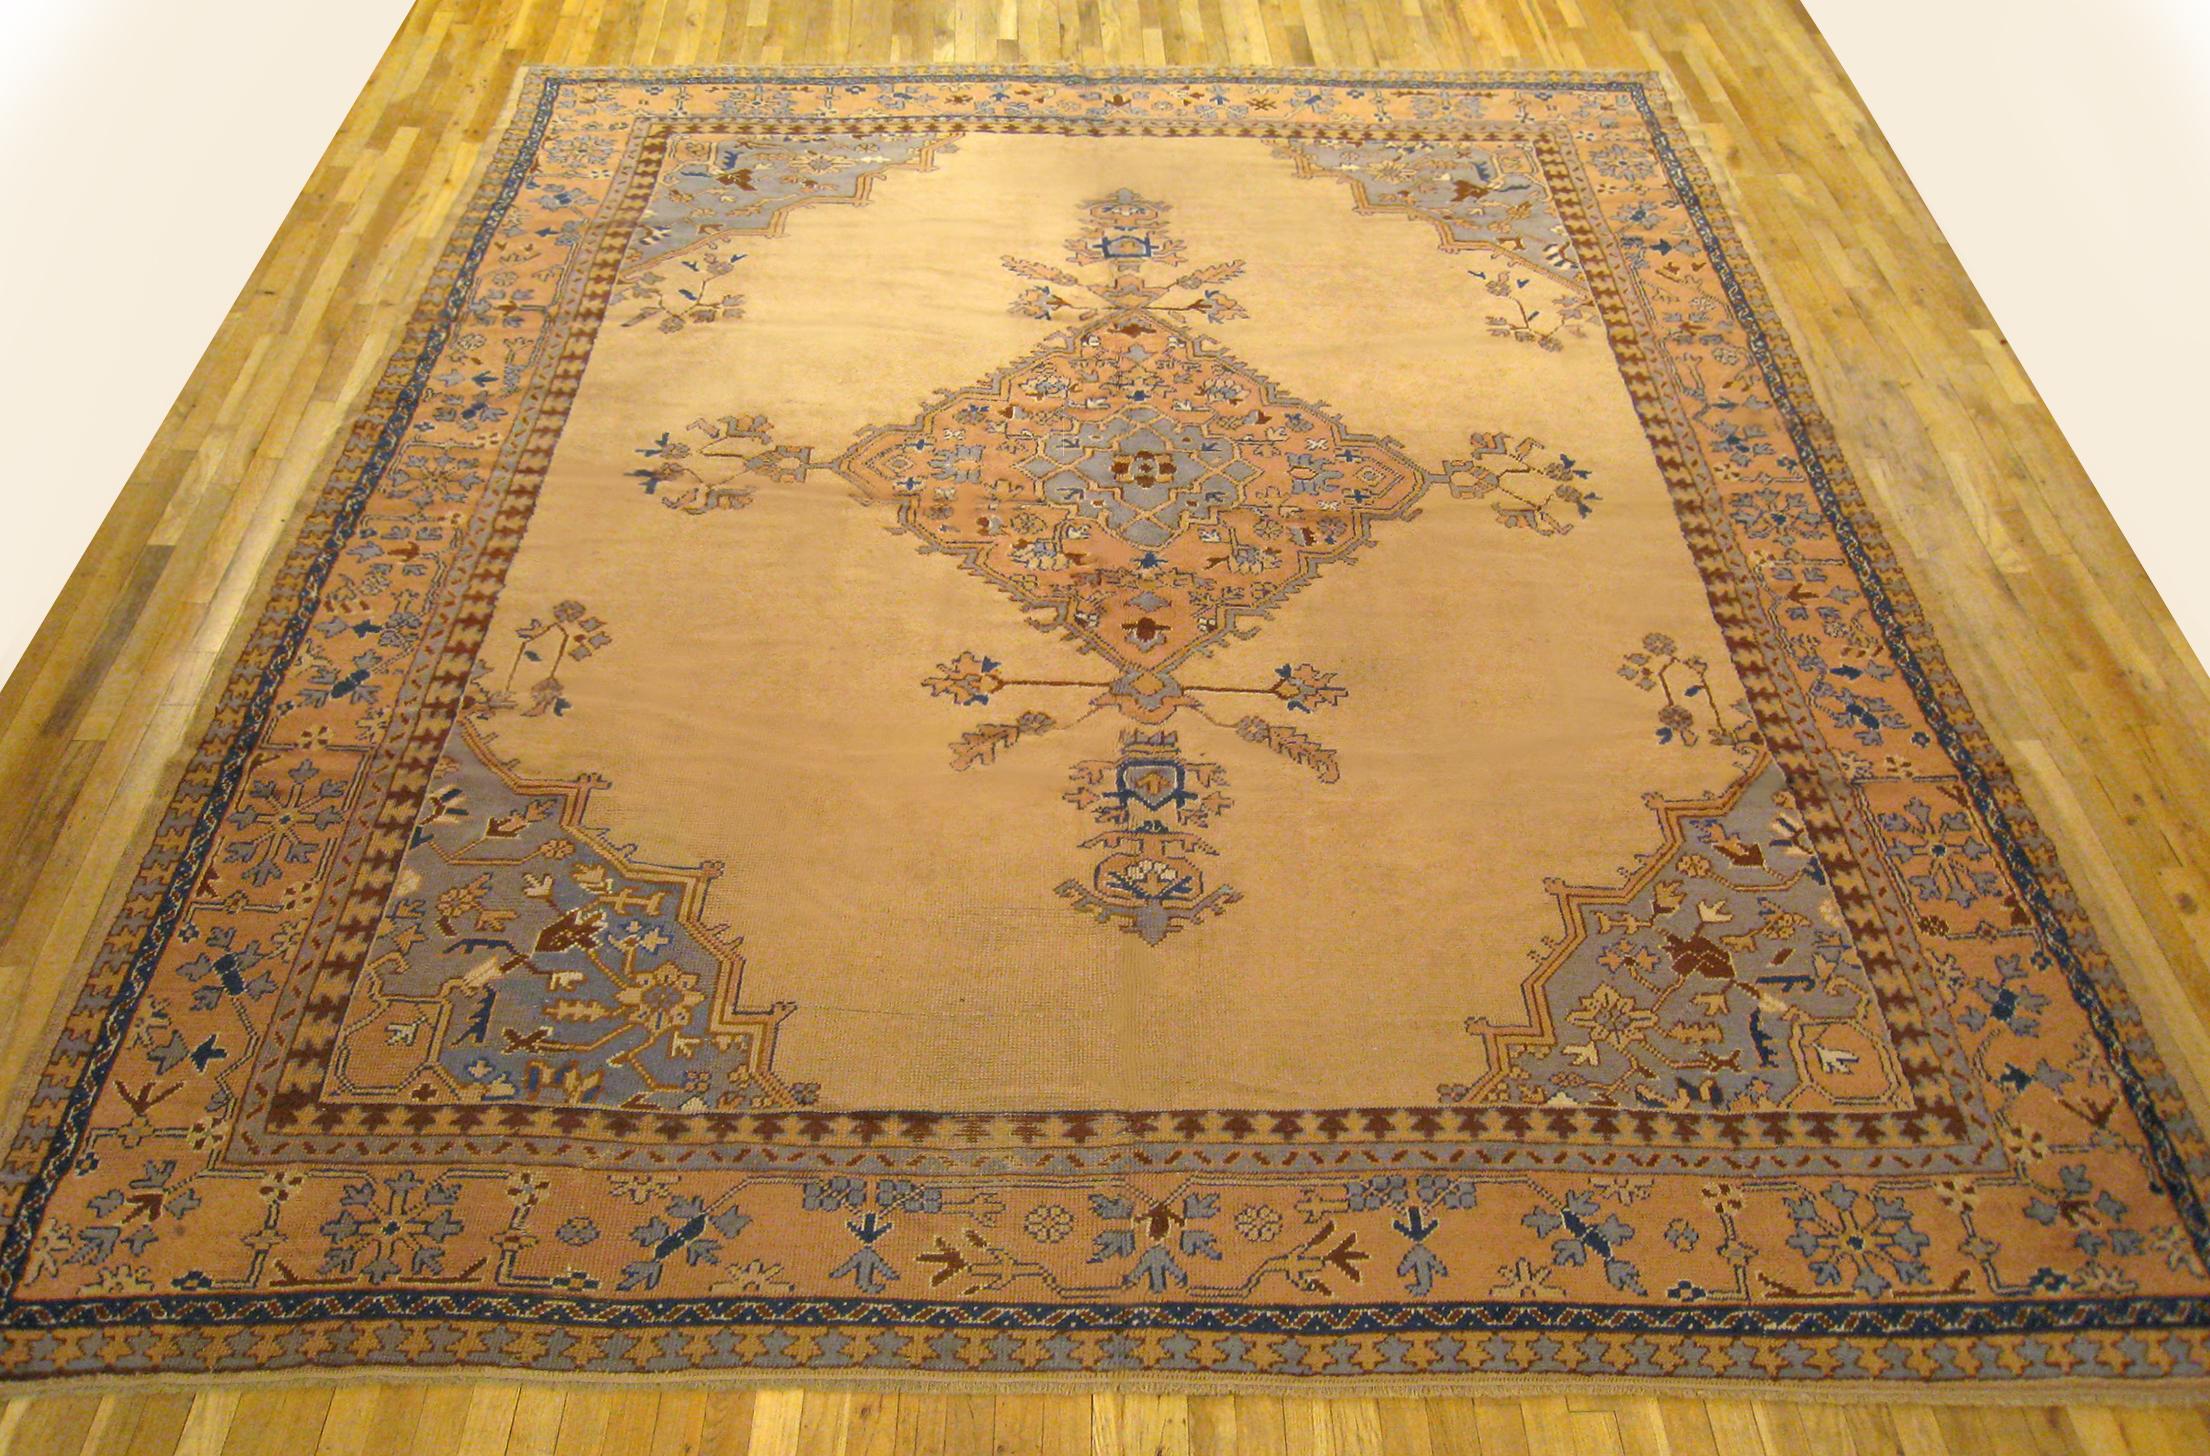 Vintage Turkish Oushak oriental rug, size 12'5 H x 10'0 W, circa 1930.  This hand-knotted semi-antique wool Turkish carpet features soft earth tones throughout, with a medallion design on an otherwise open central field.  This nicely balanced piece